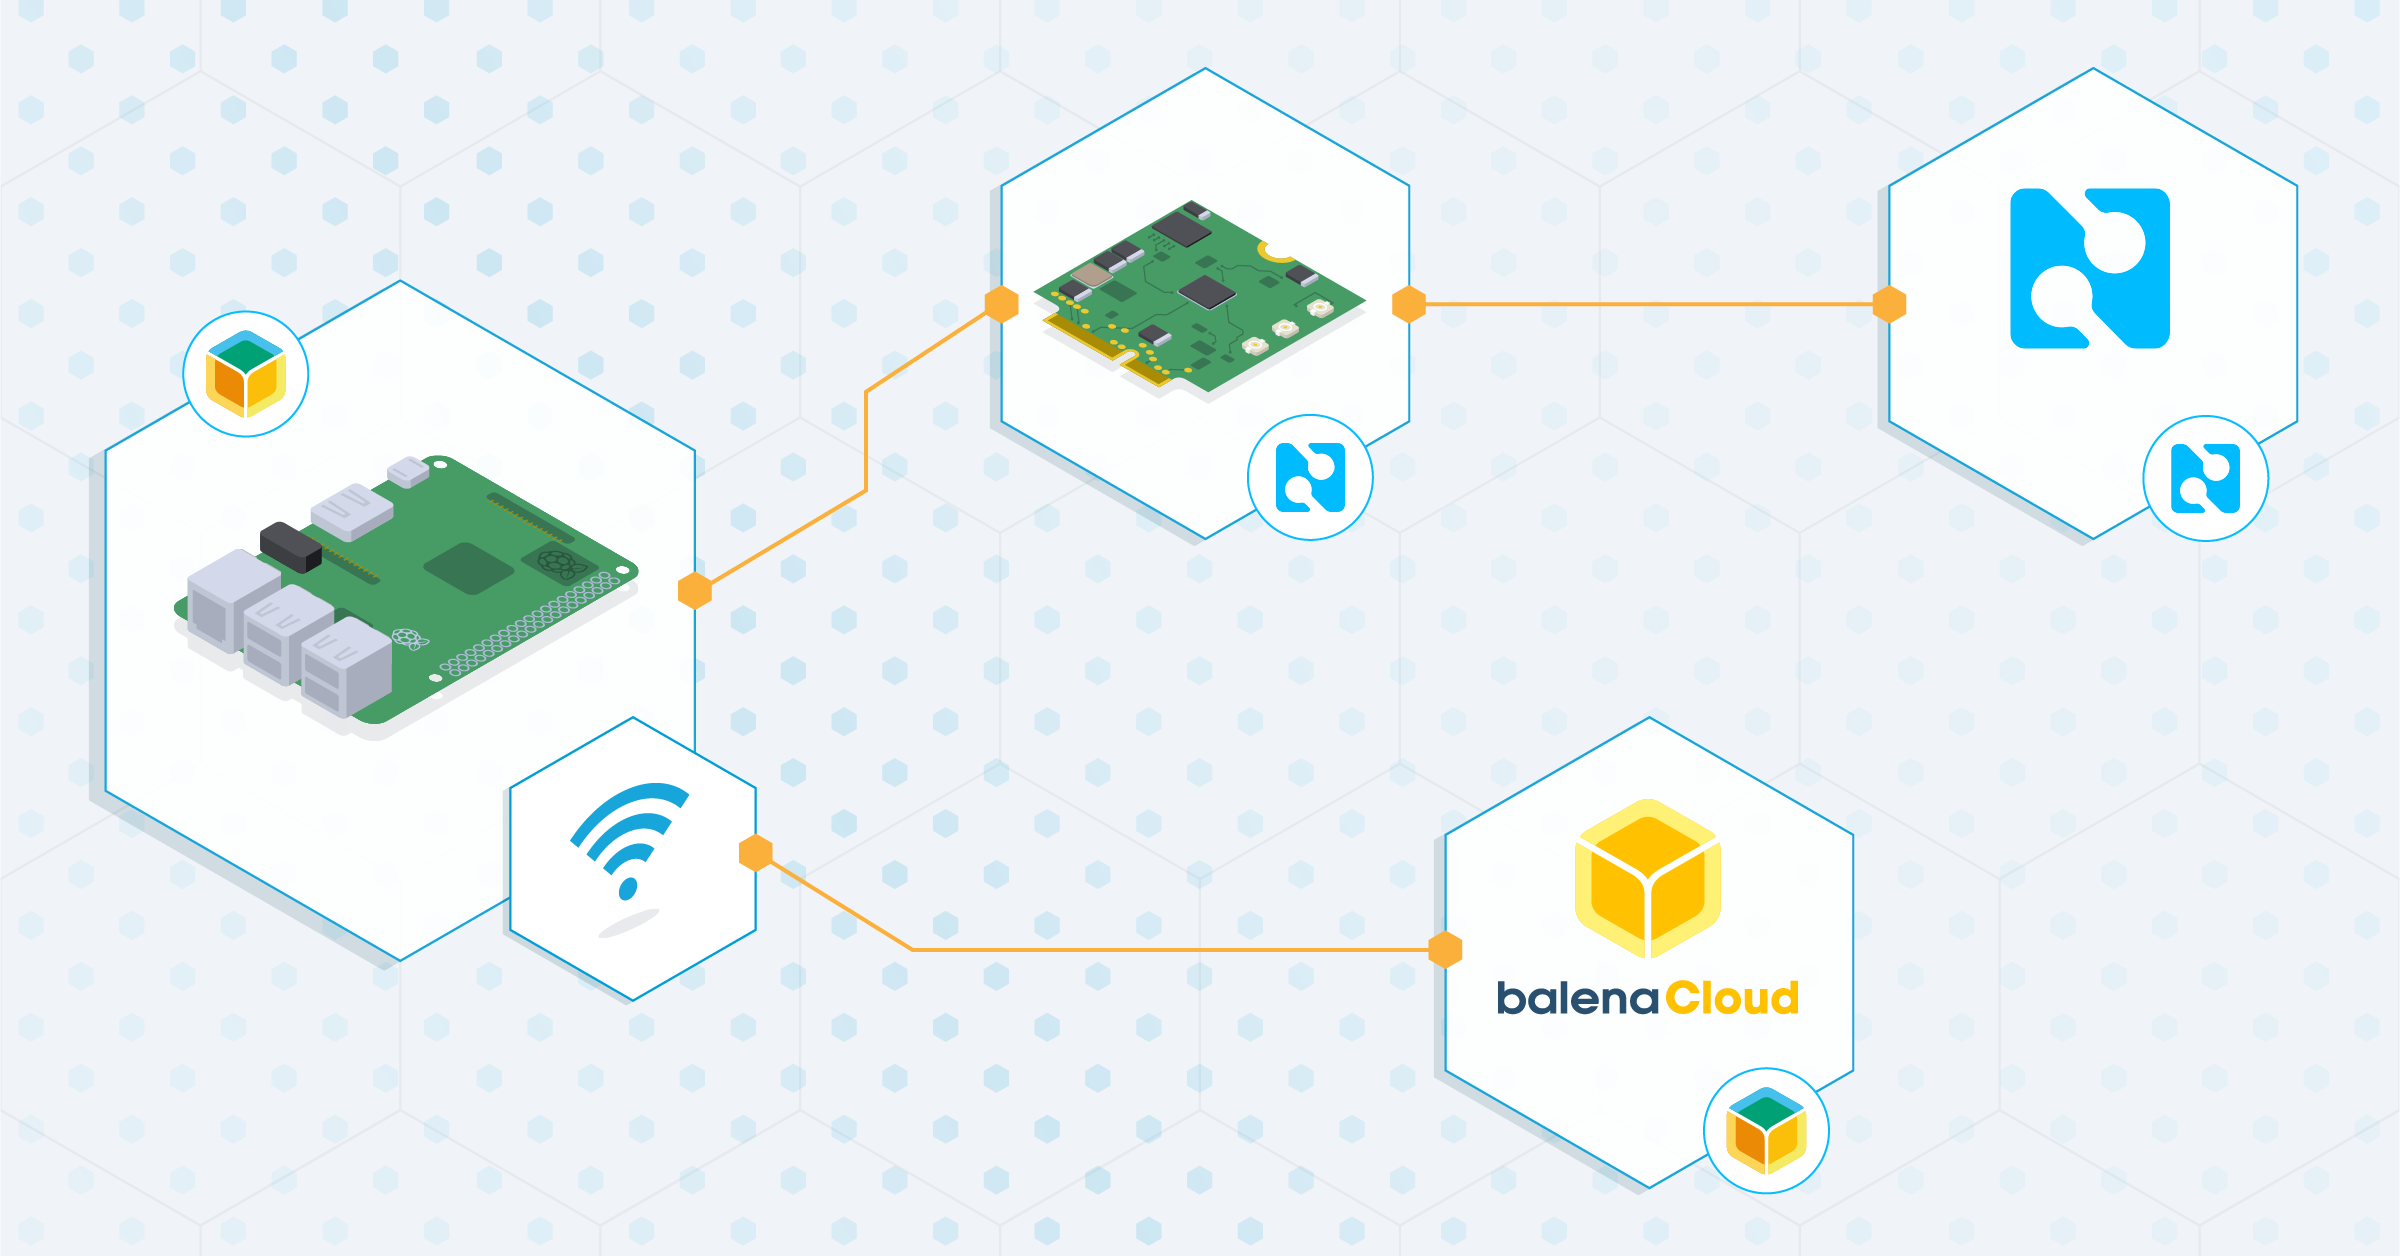 Set up Blues Wireless as a backup connectivity method for your balena fleet